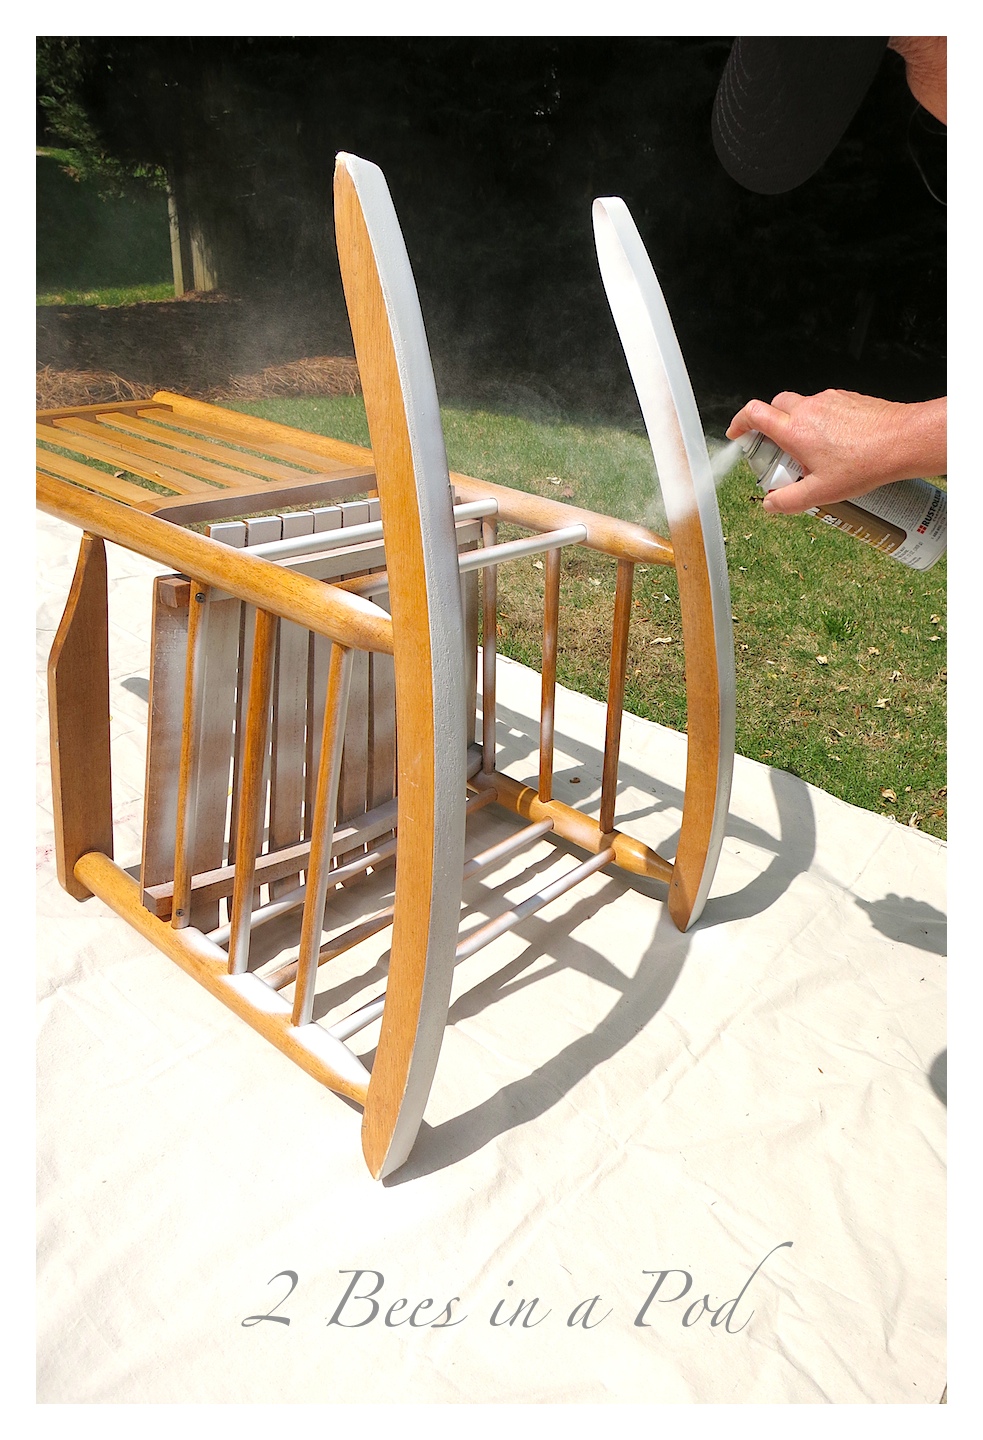 A vintage rocker gets a makeover. By adding chalk paint and clear wax it modernized the chair, but get the integrity of the age of the rocker intact. 